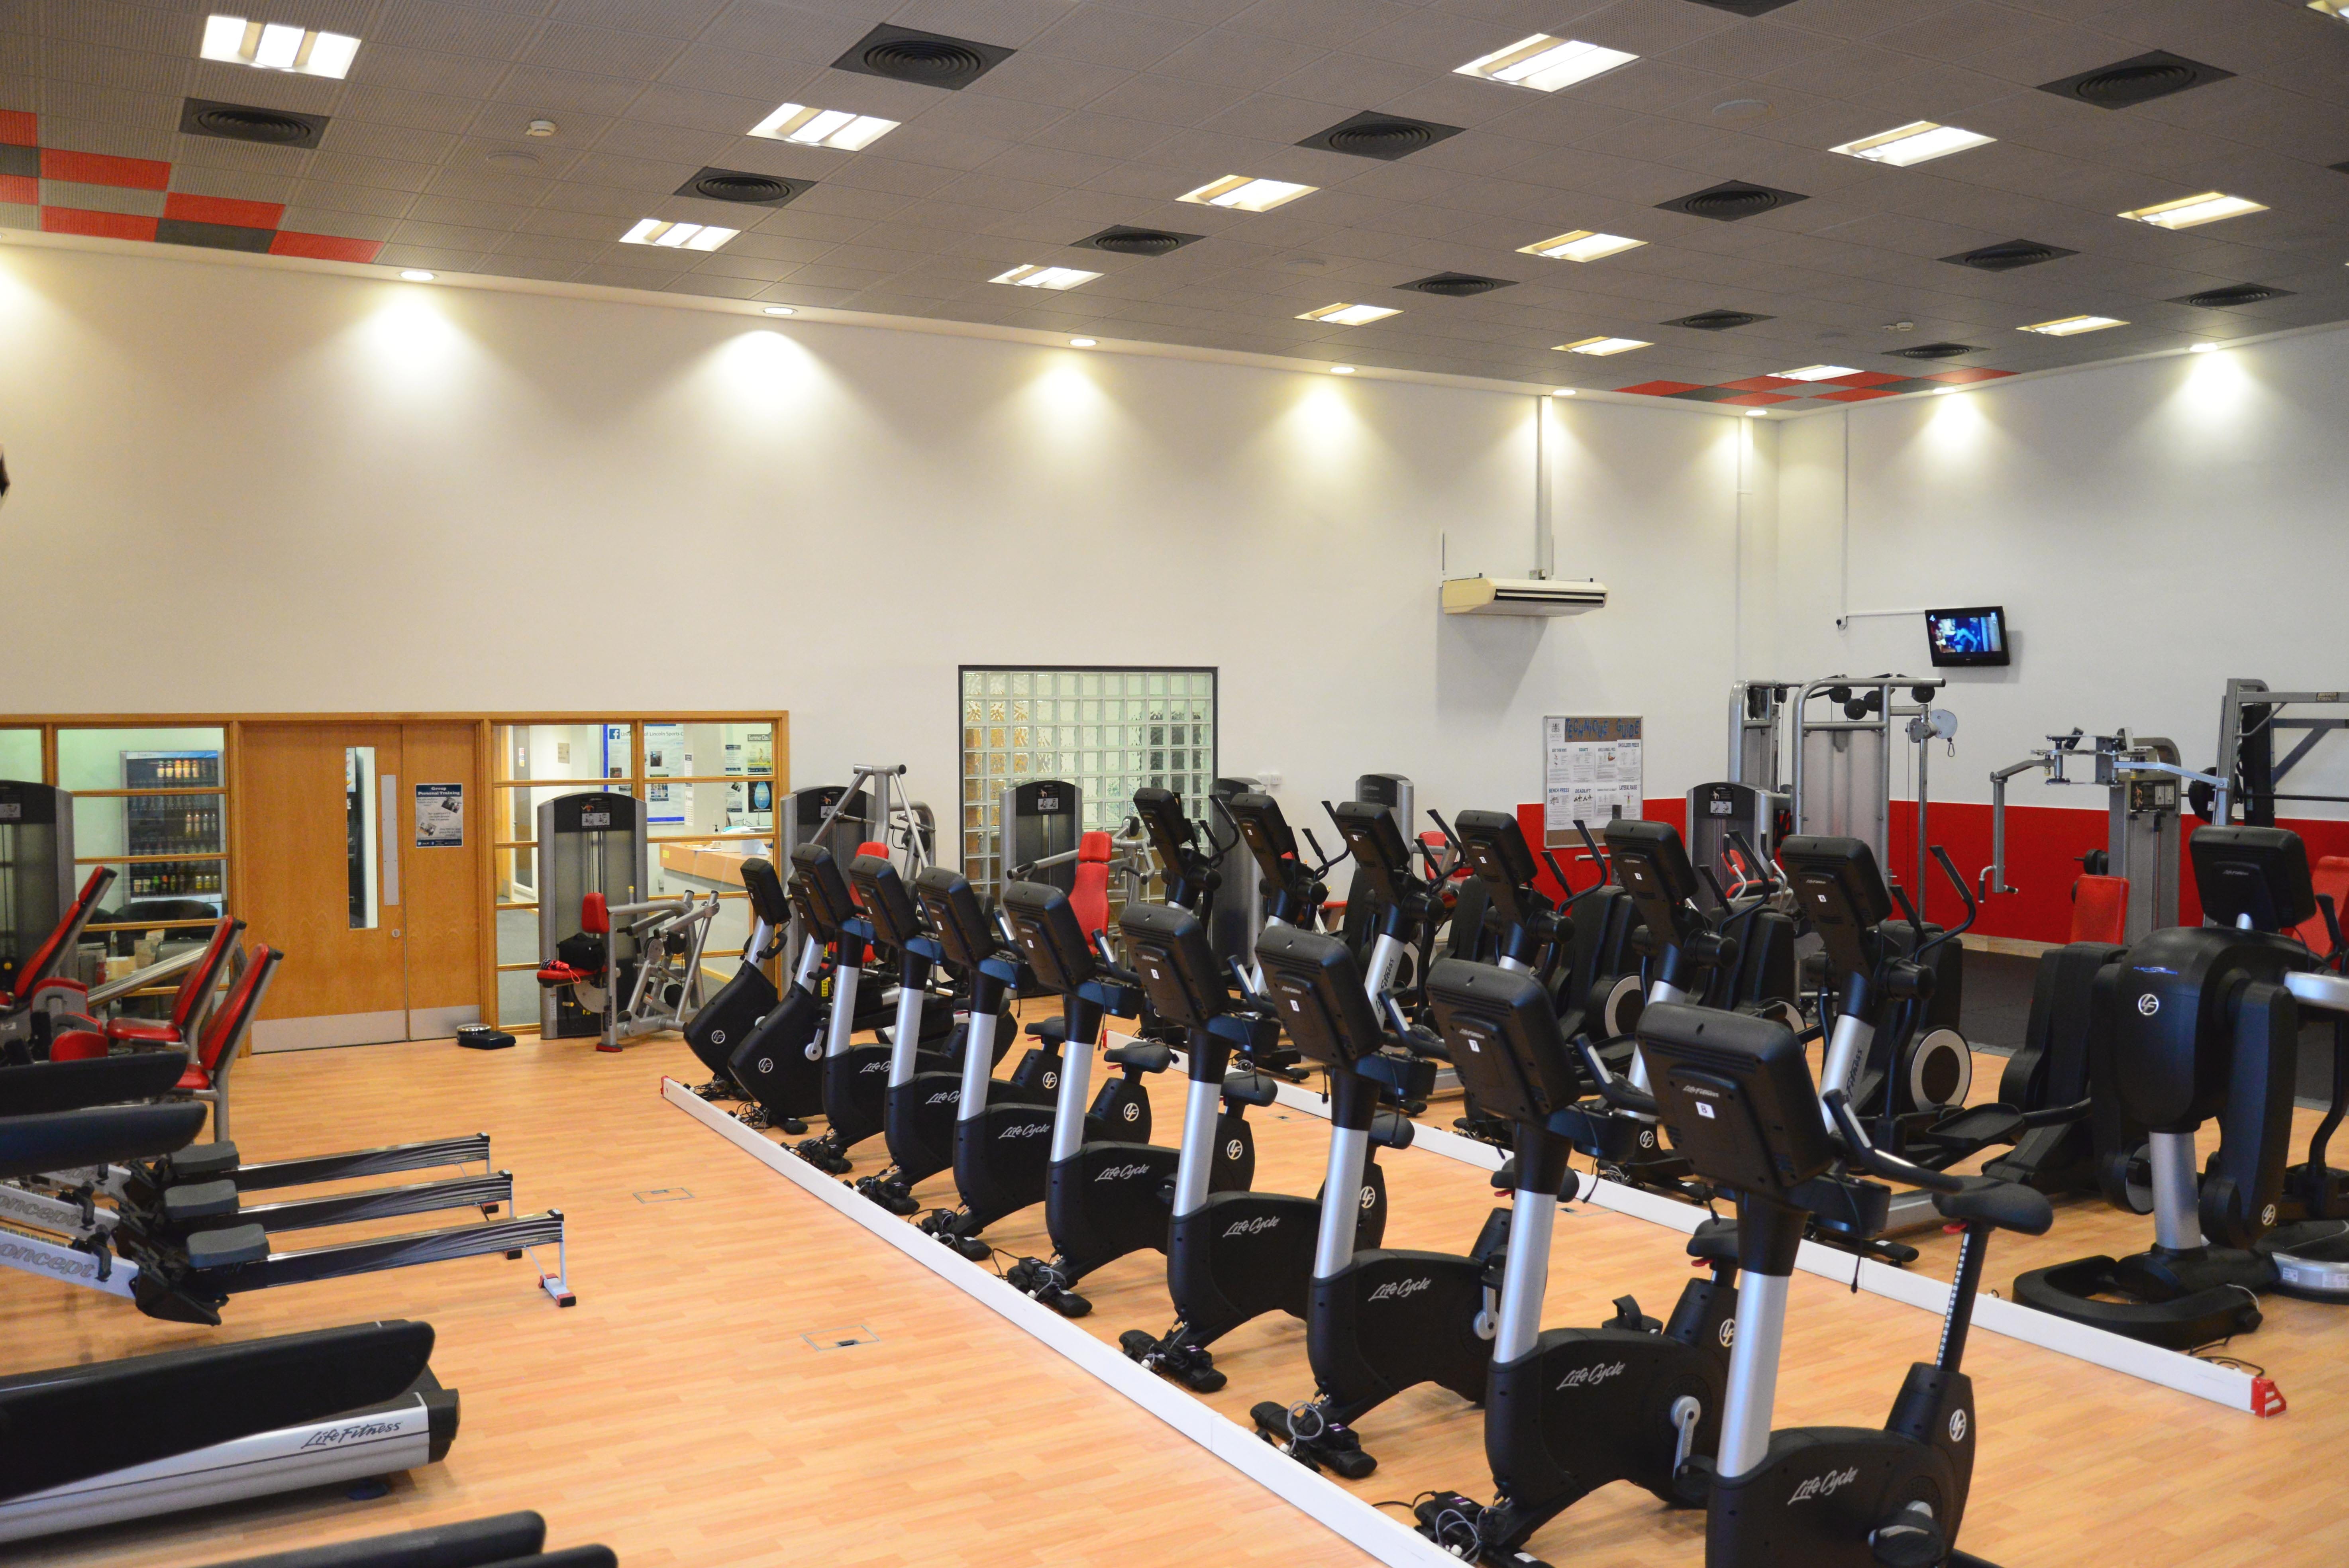 a picture of the university of lincoln gym showing treadmills, stationary bikes, cross trainers, weight machines, and free weights